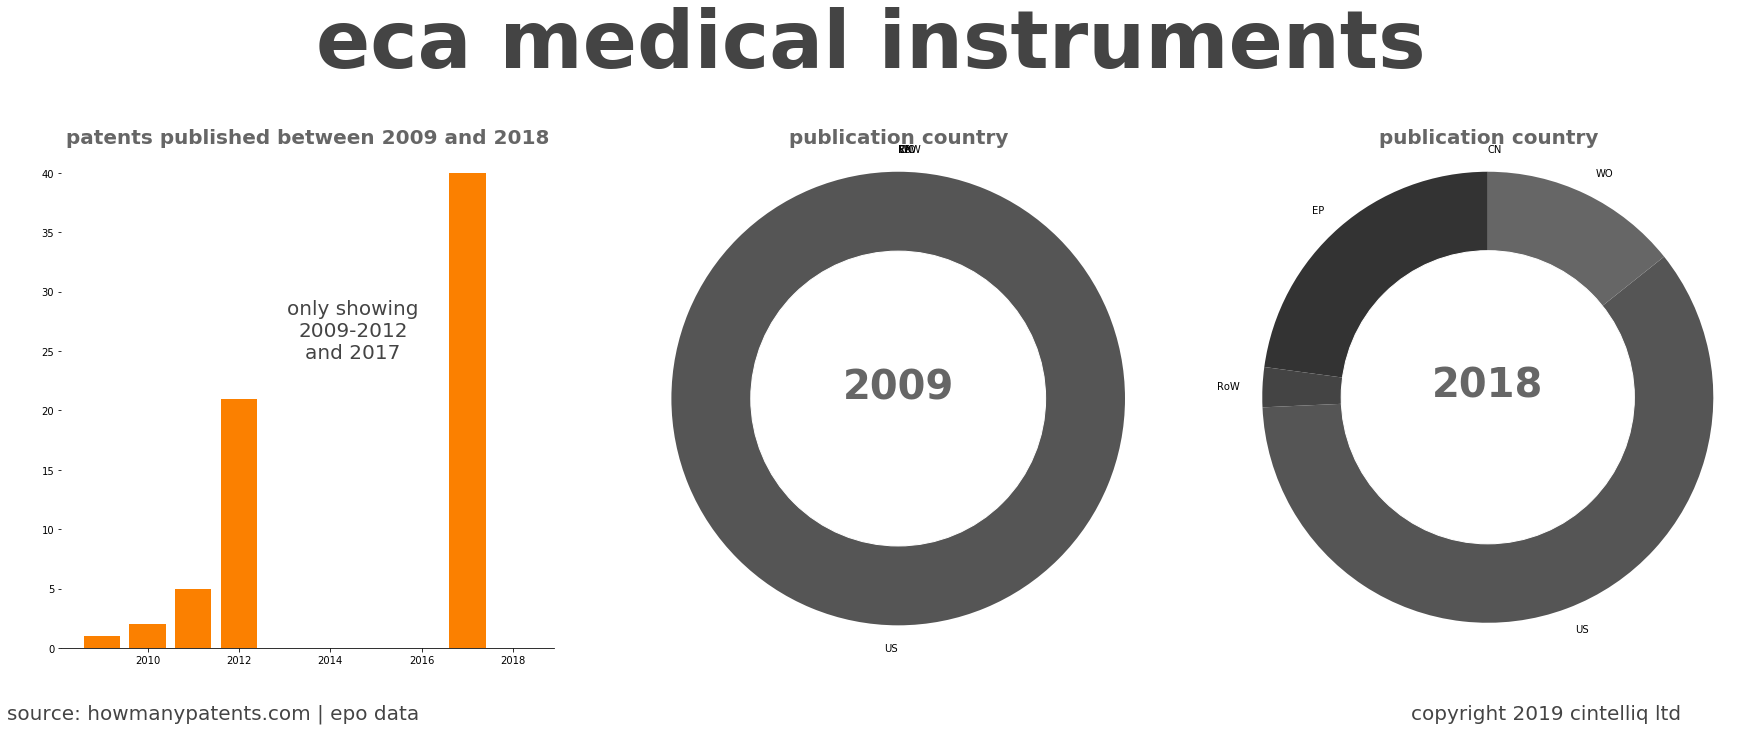 summary of patents for Eca Medical Instruments